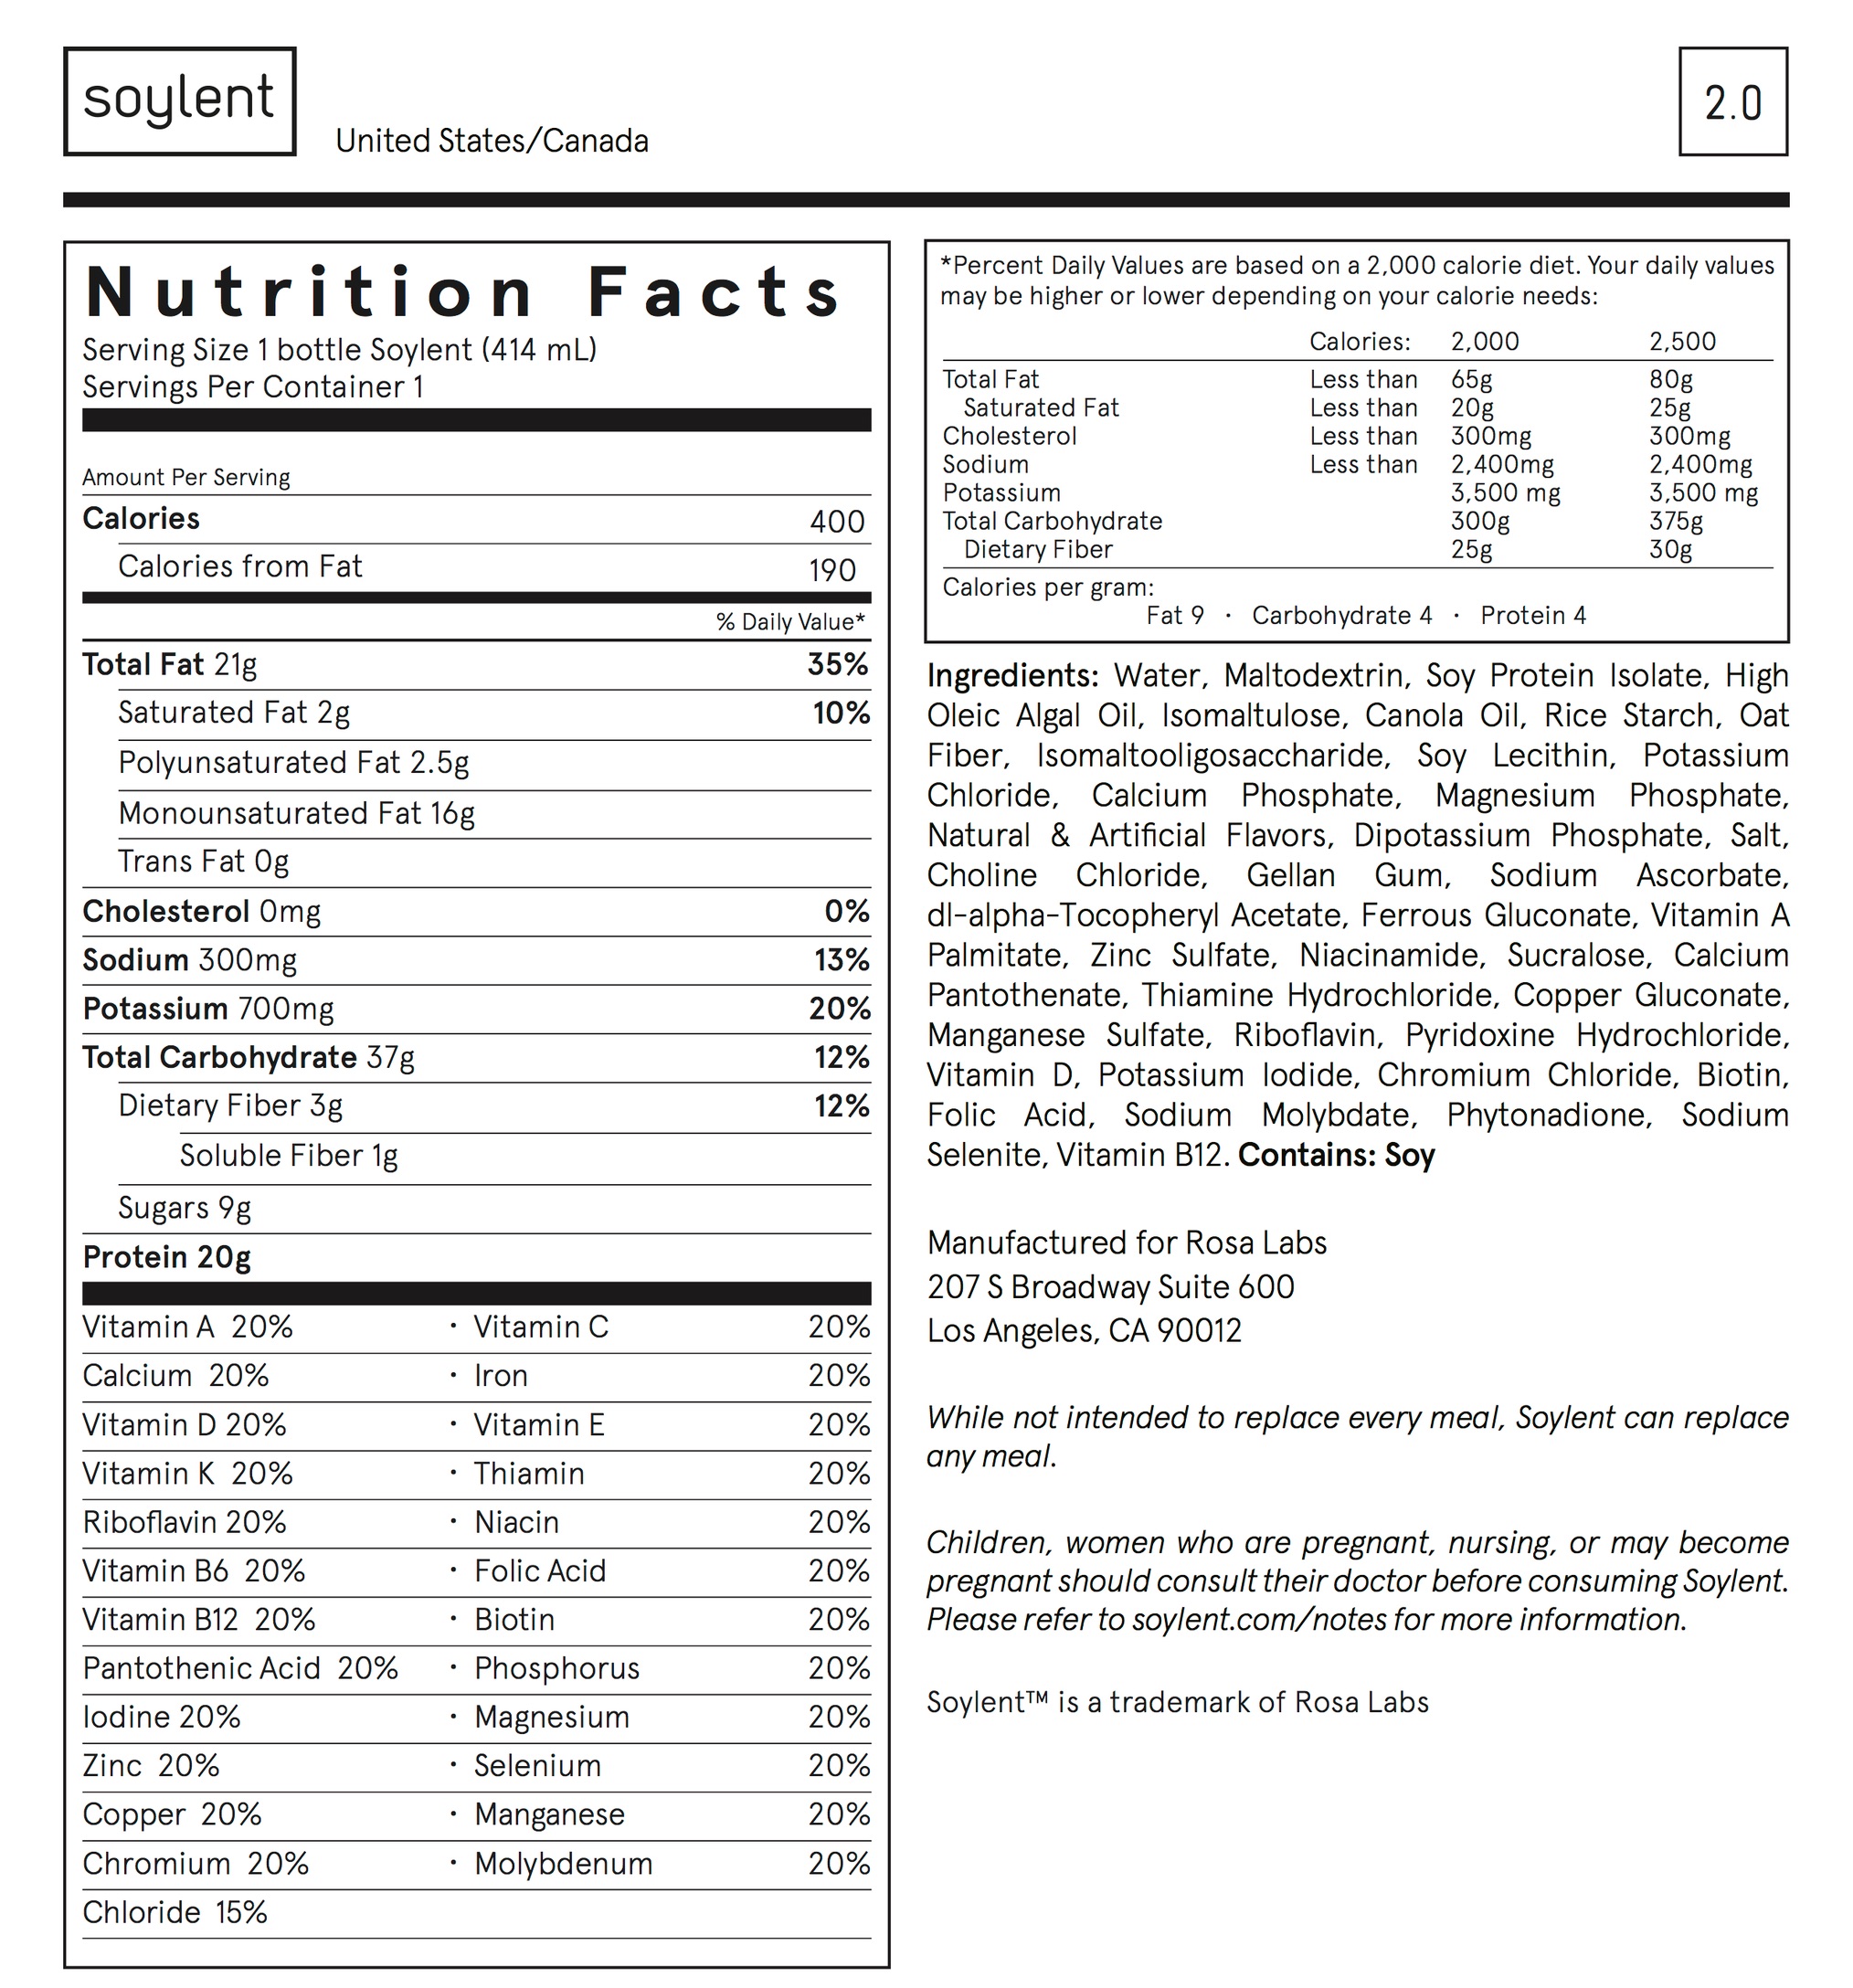 Nutritional label and ingredients list from a bottle of Soylent.